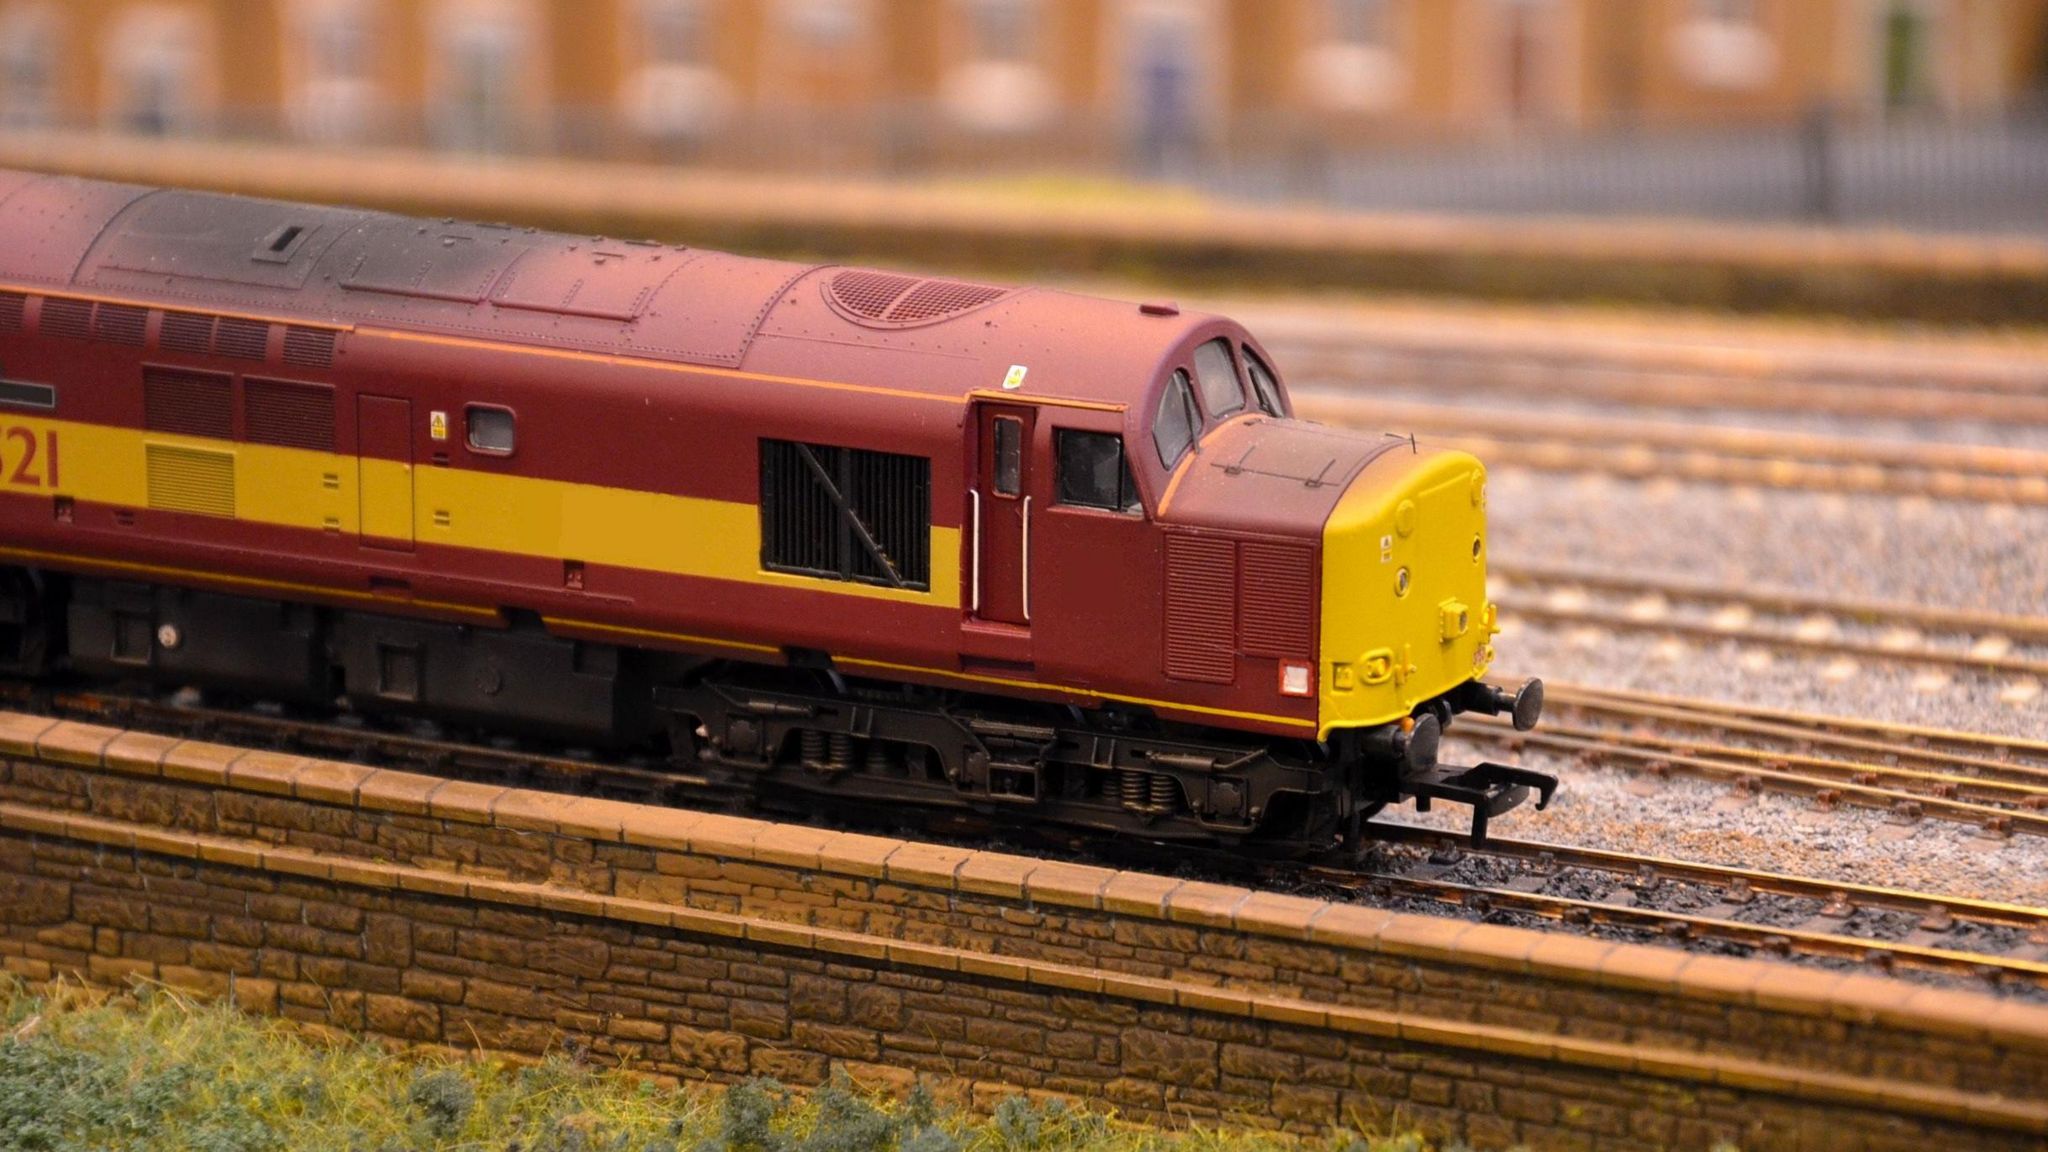 A model train running on a track